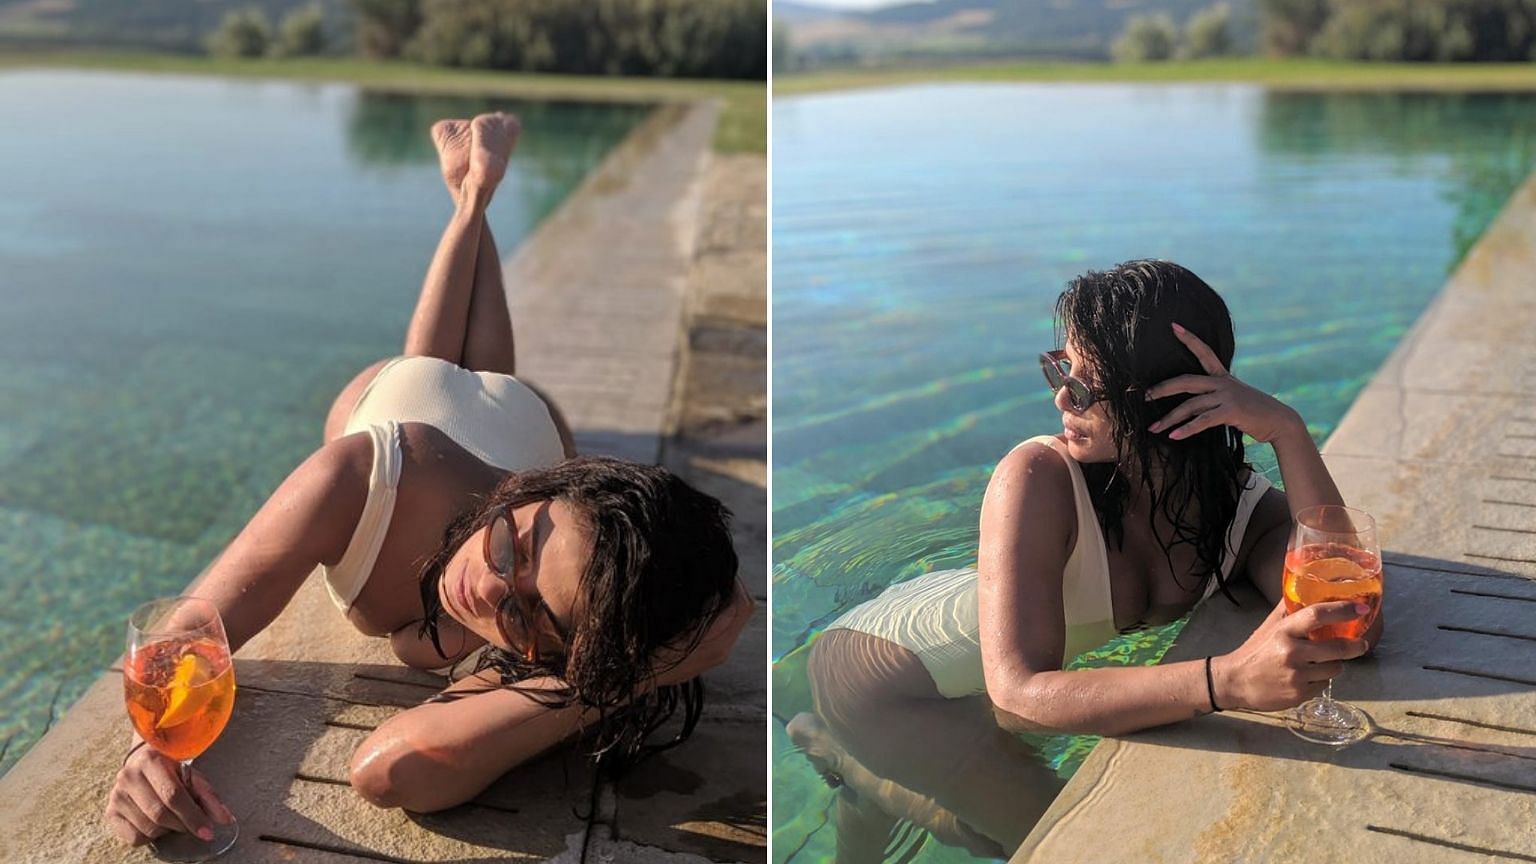 Priyanka Chopra shared pictures from her vacation